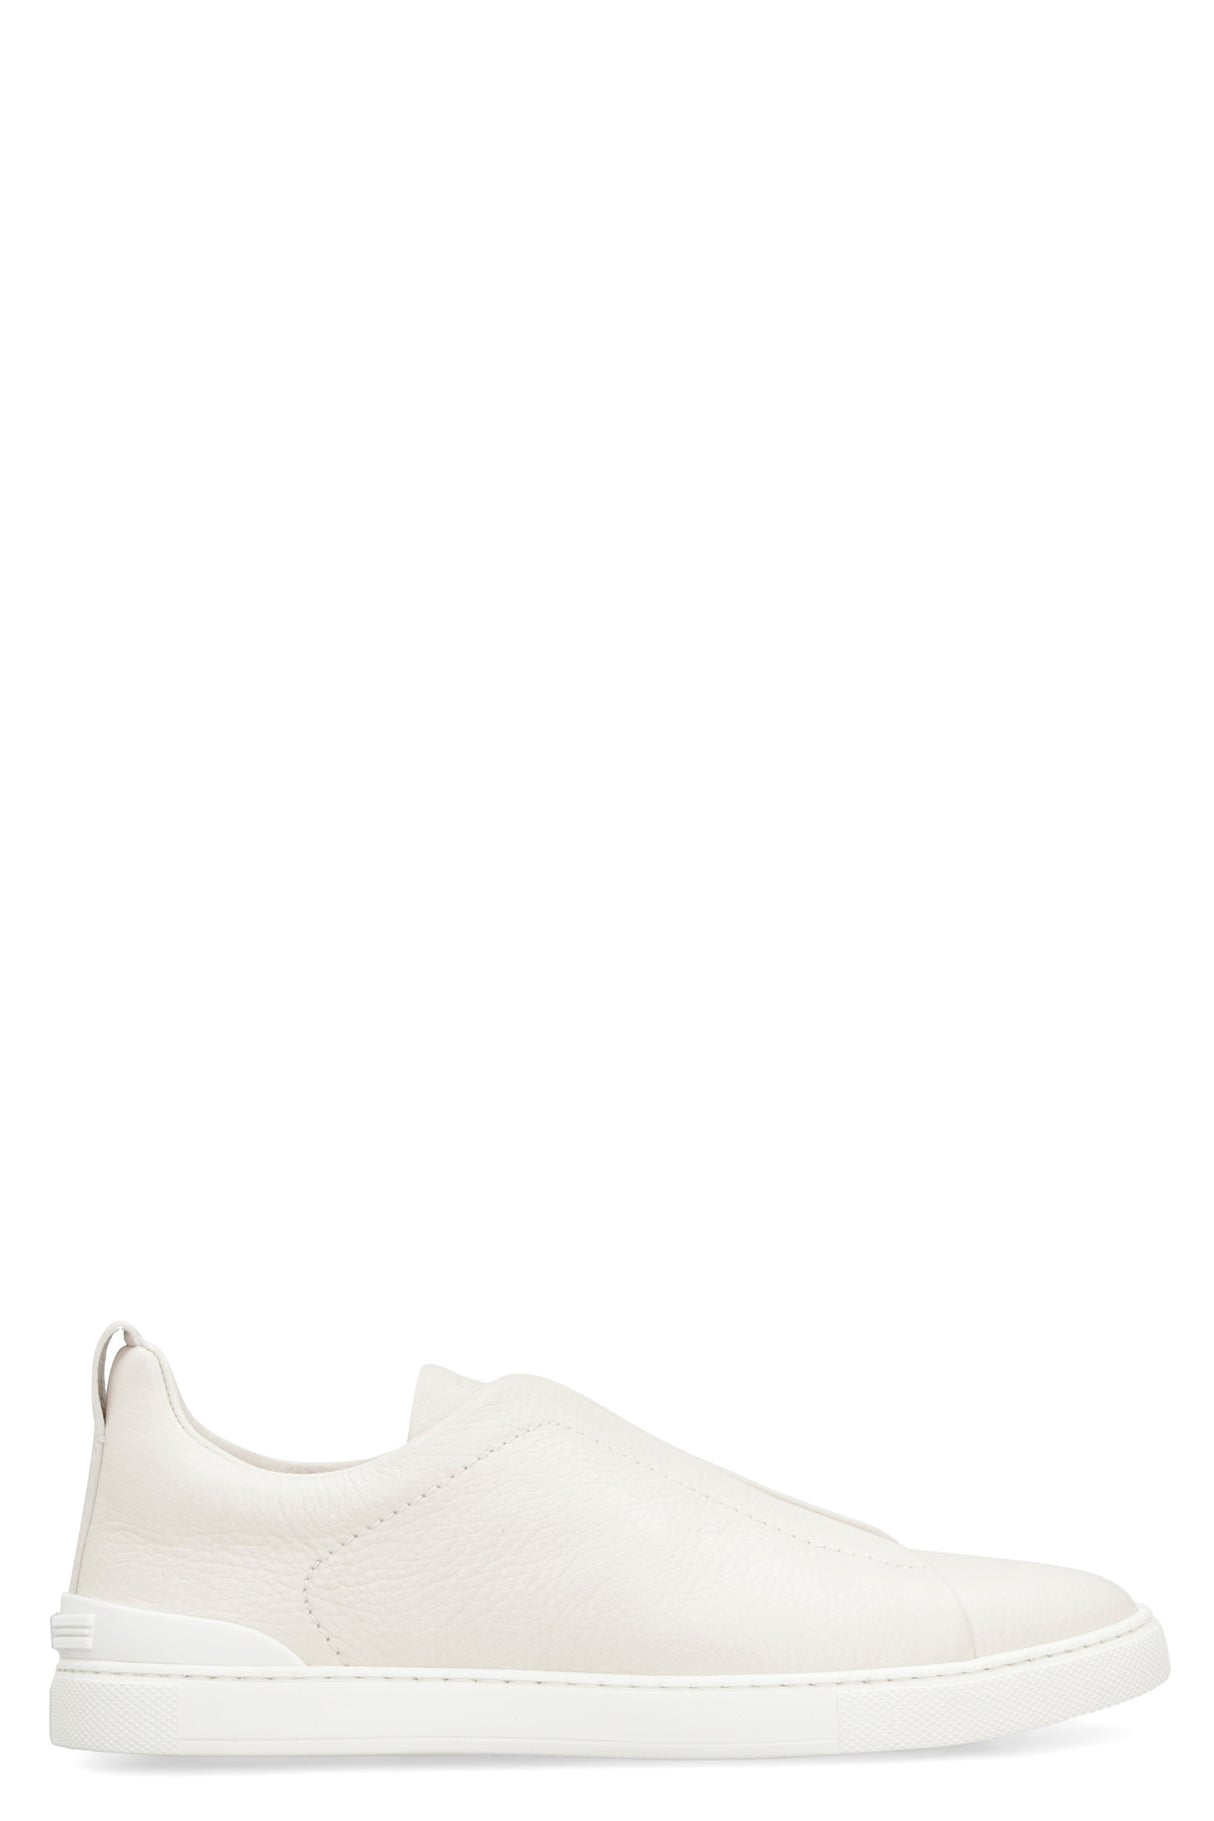 ZEGNA Men's White Leather Triple Stitch Sneakers for FW23